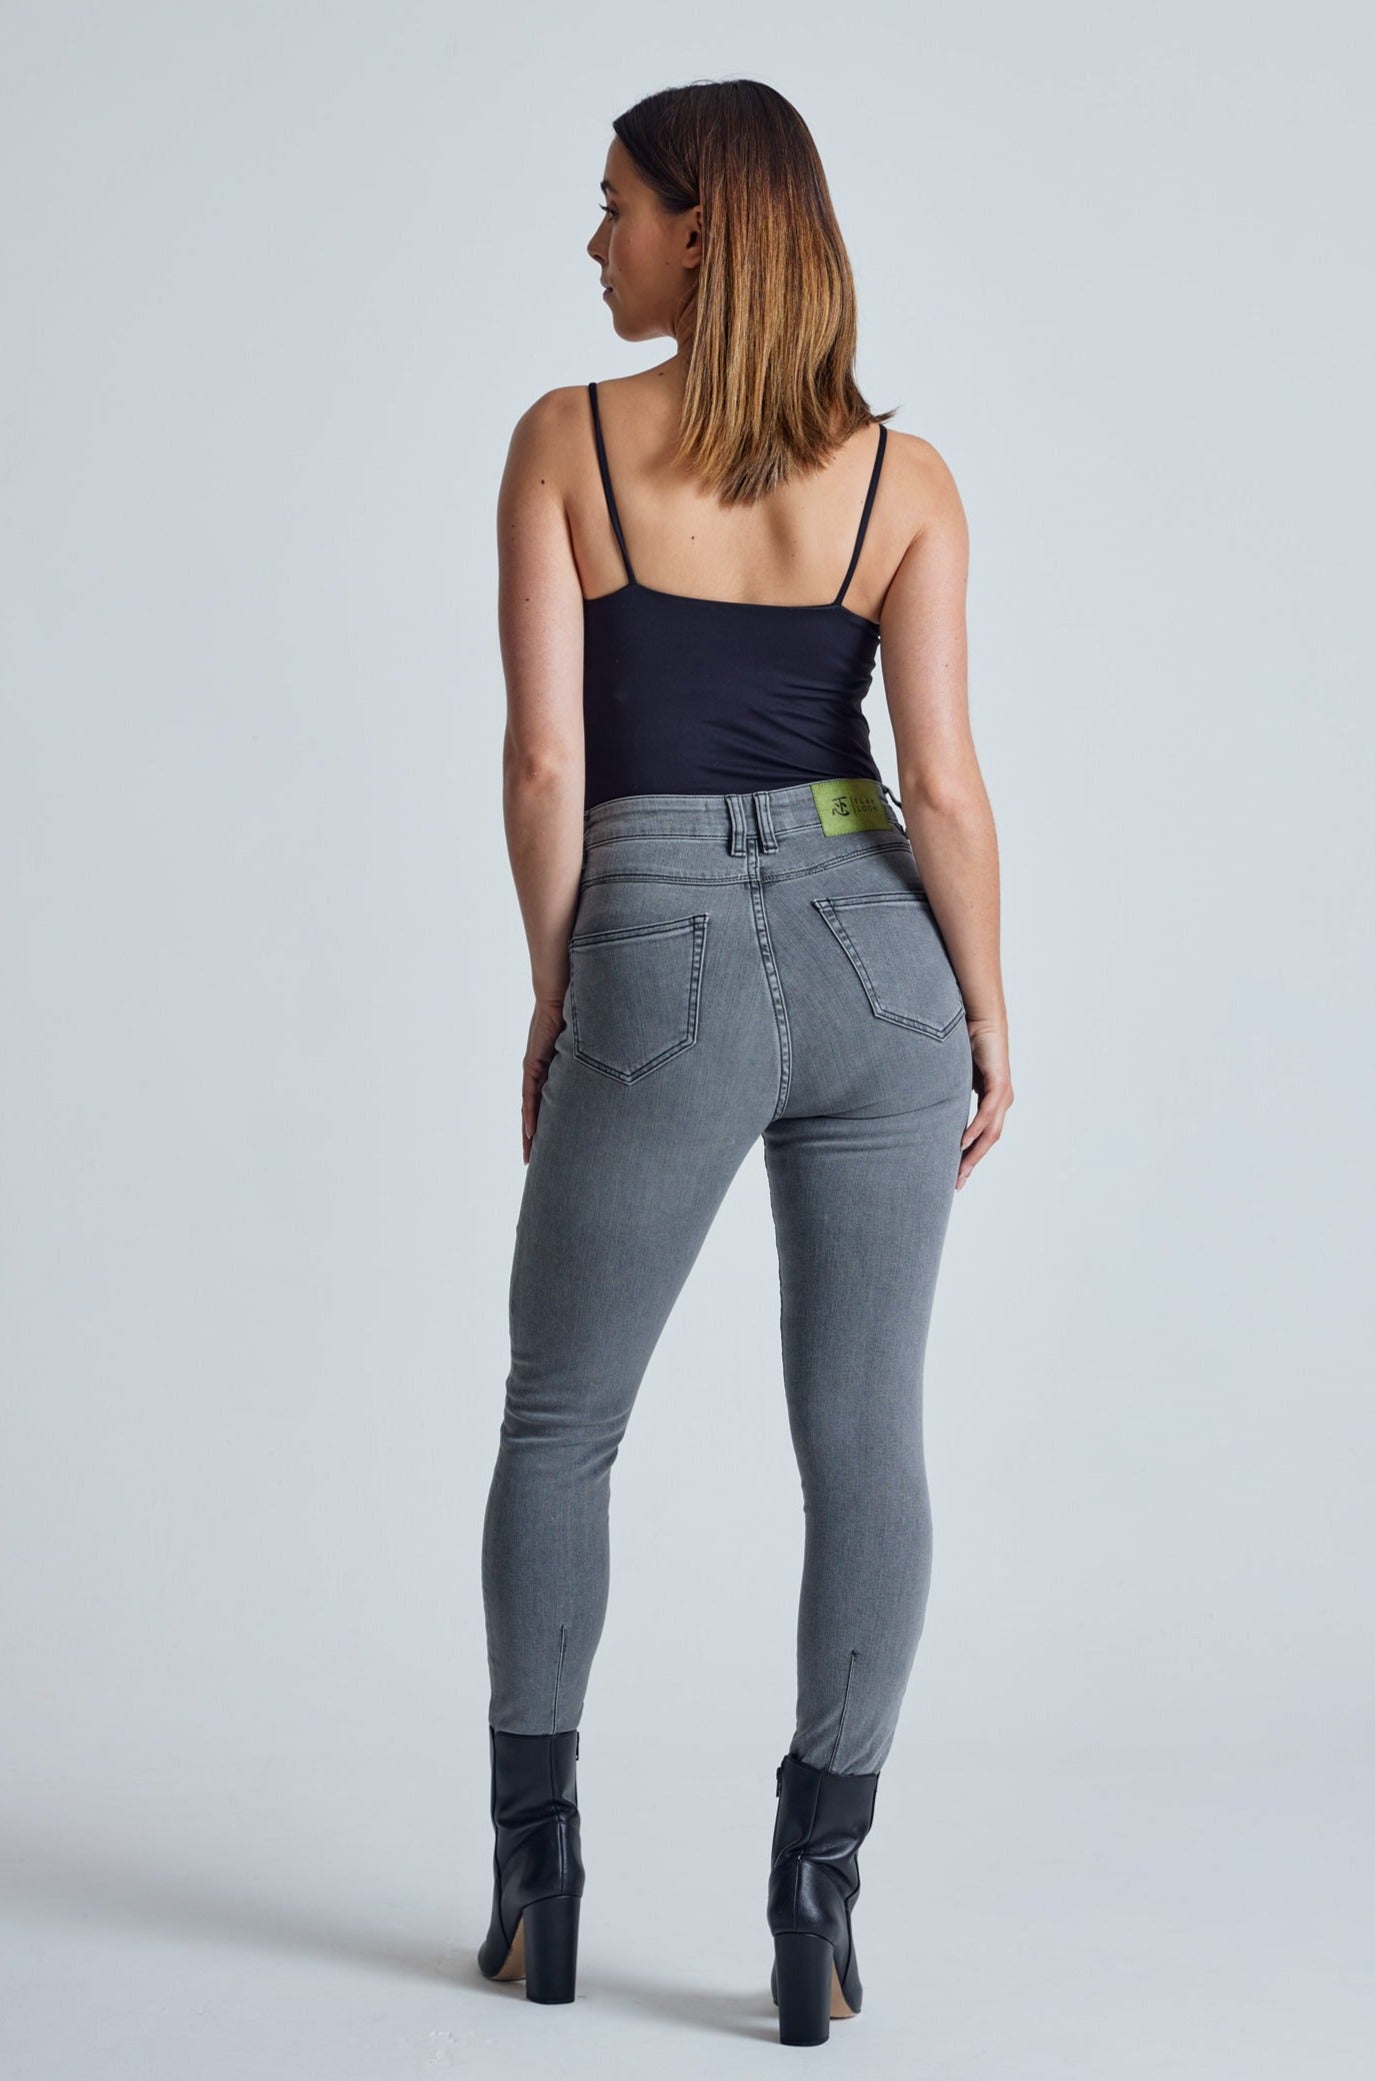 Silver Fox Nina High Waisted Skinny Jeans - GOTS Certified Organic Cotton and Recycled Polyester